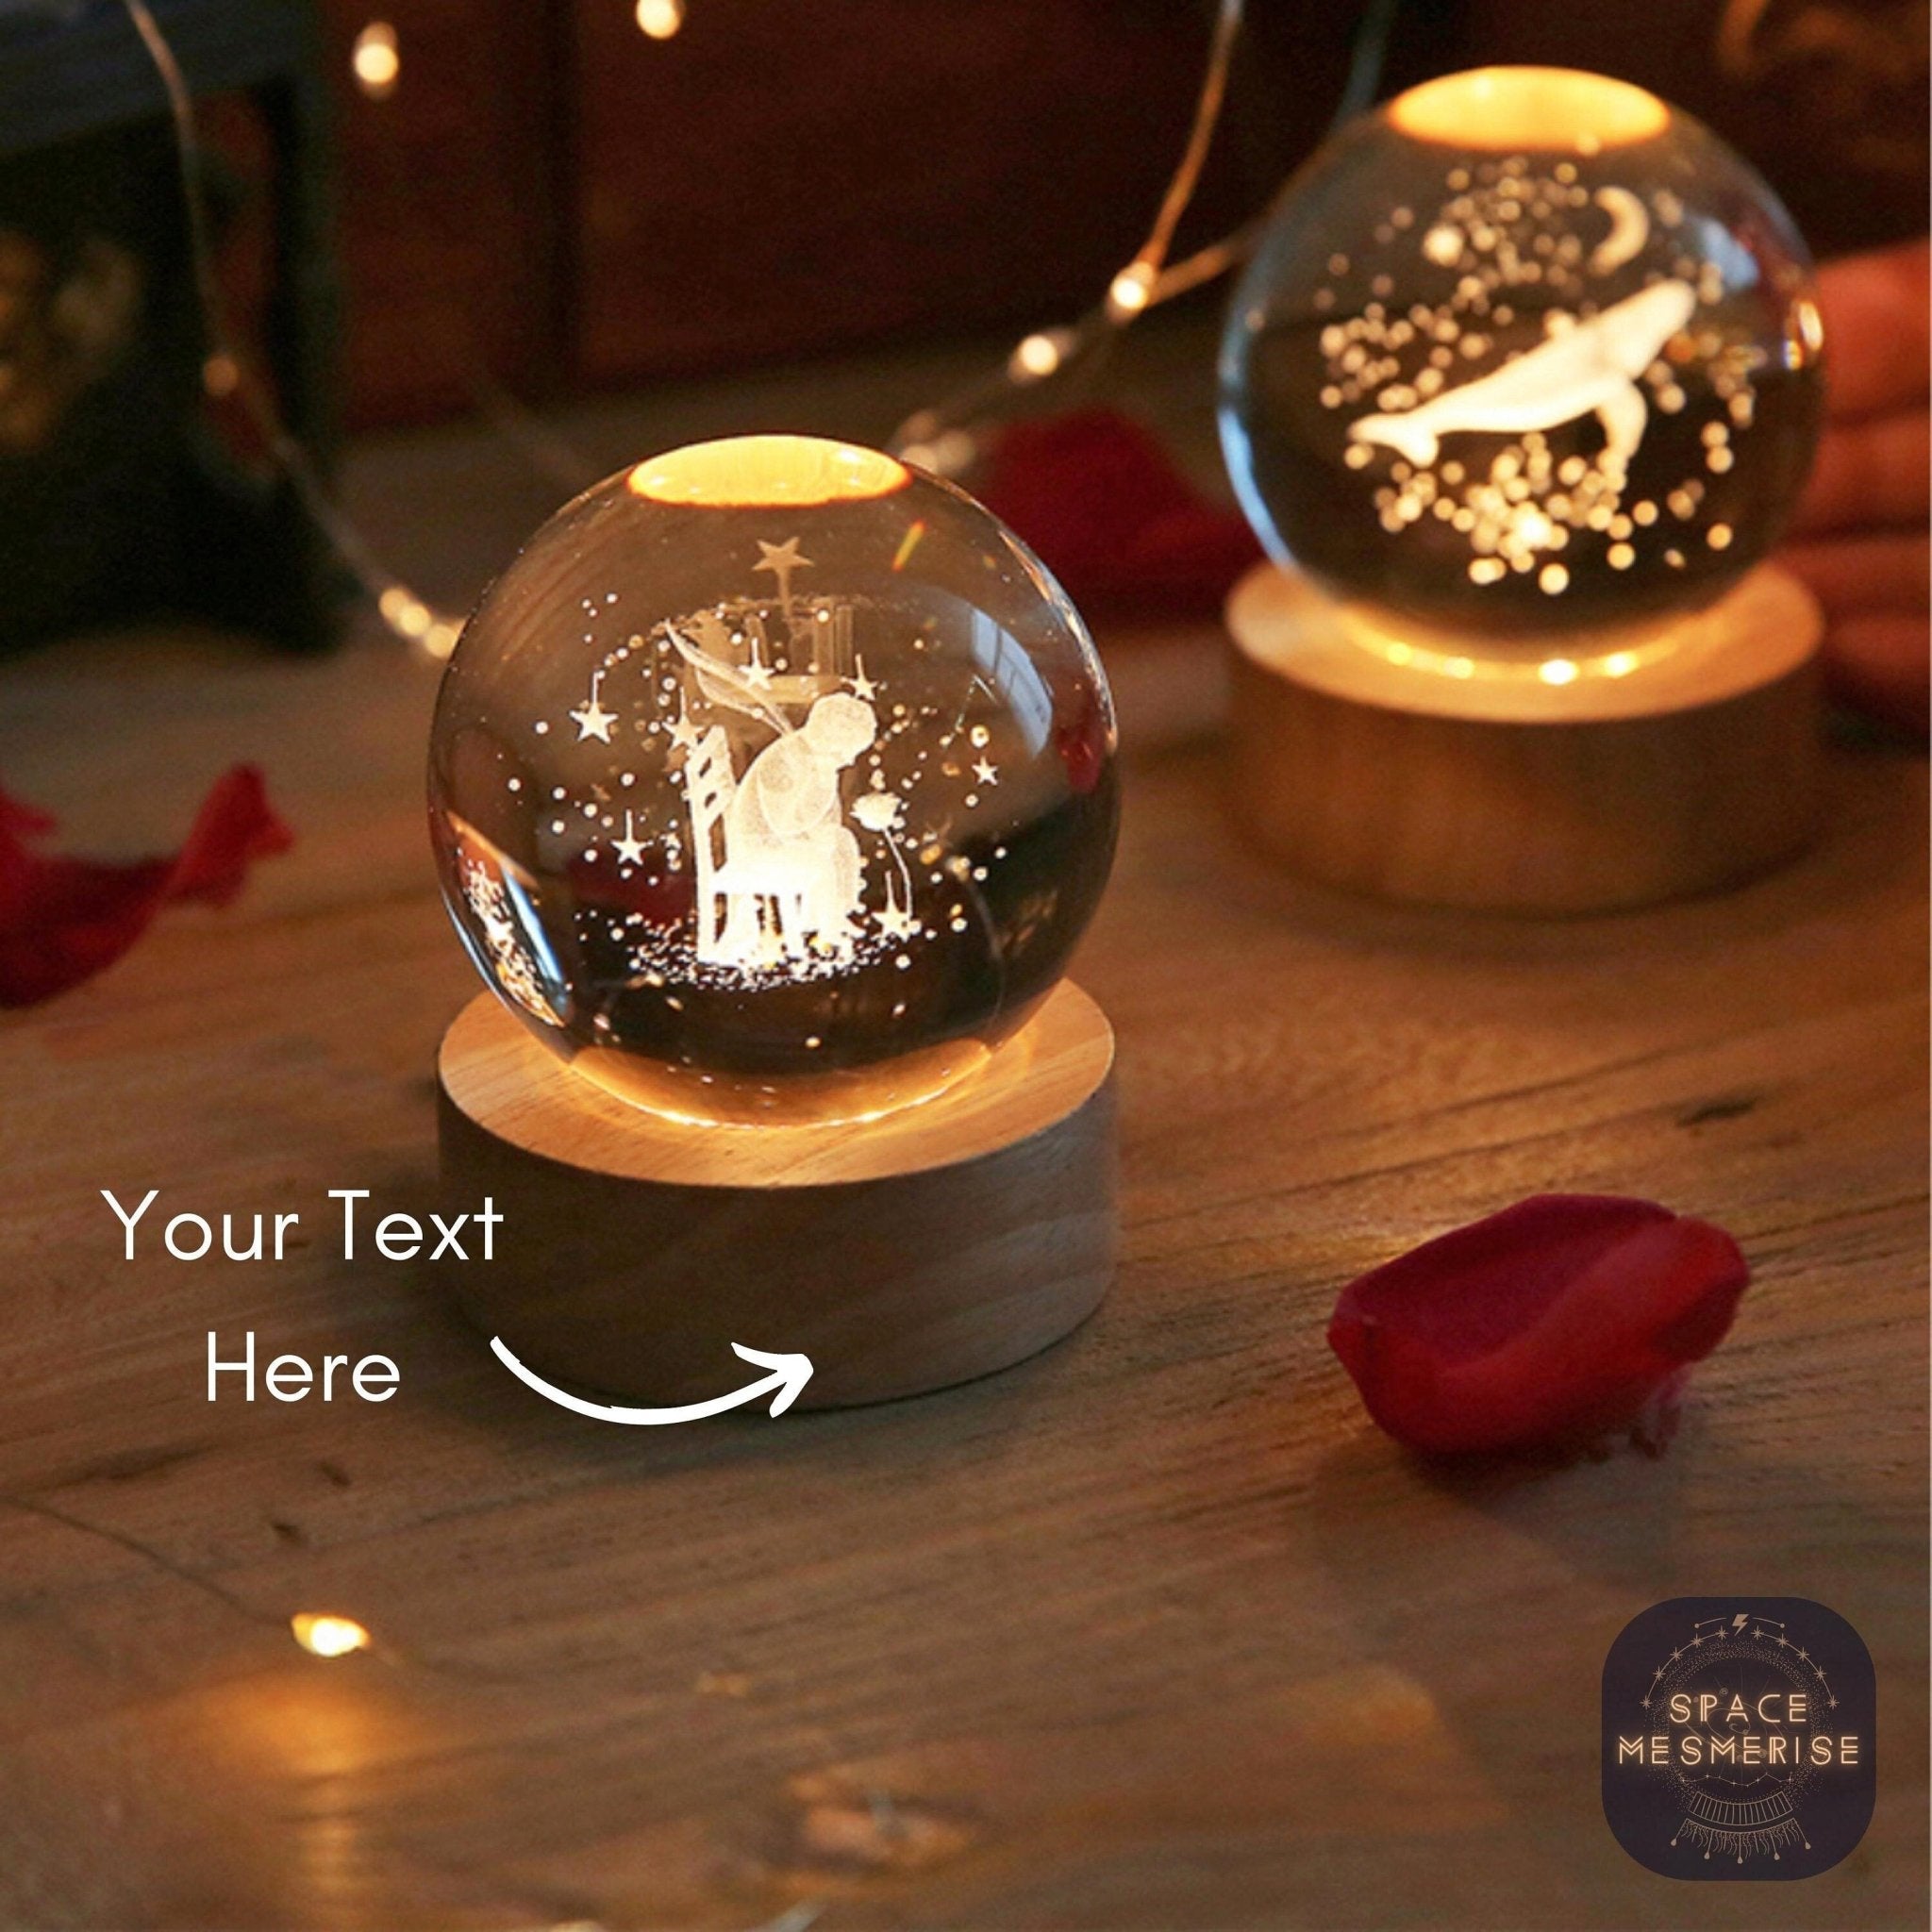 Personalized 3D led photo lamp gift for love, Personalized Birthday  Anniversary Gift Wedding Gift Ideas - $39.90 : Pic2Lamp - 3D Creative Light  - Photo Lamp - Custom Photo 3D Lamp - Picture Lamp | Pic2lamp